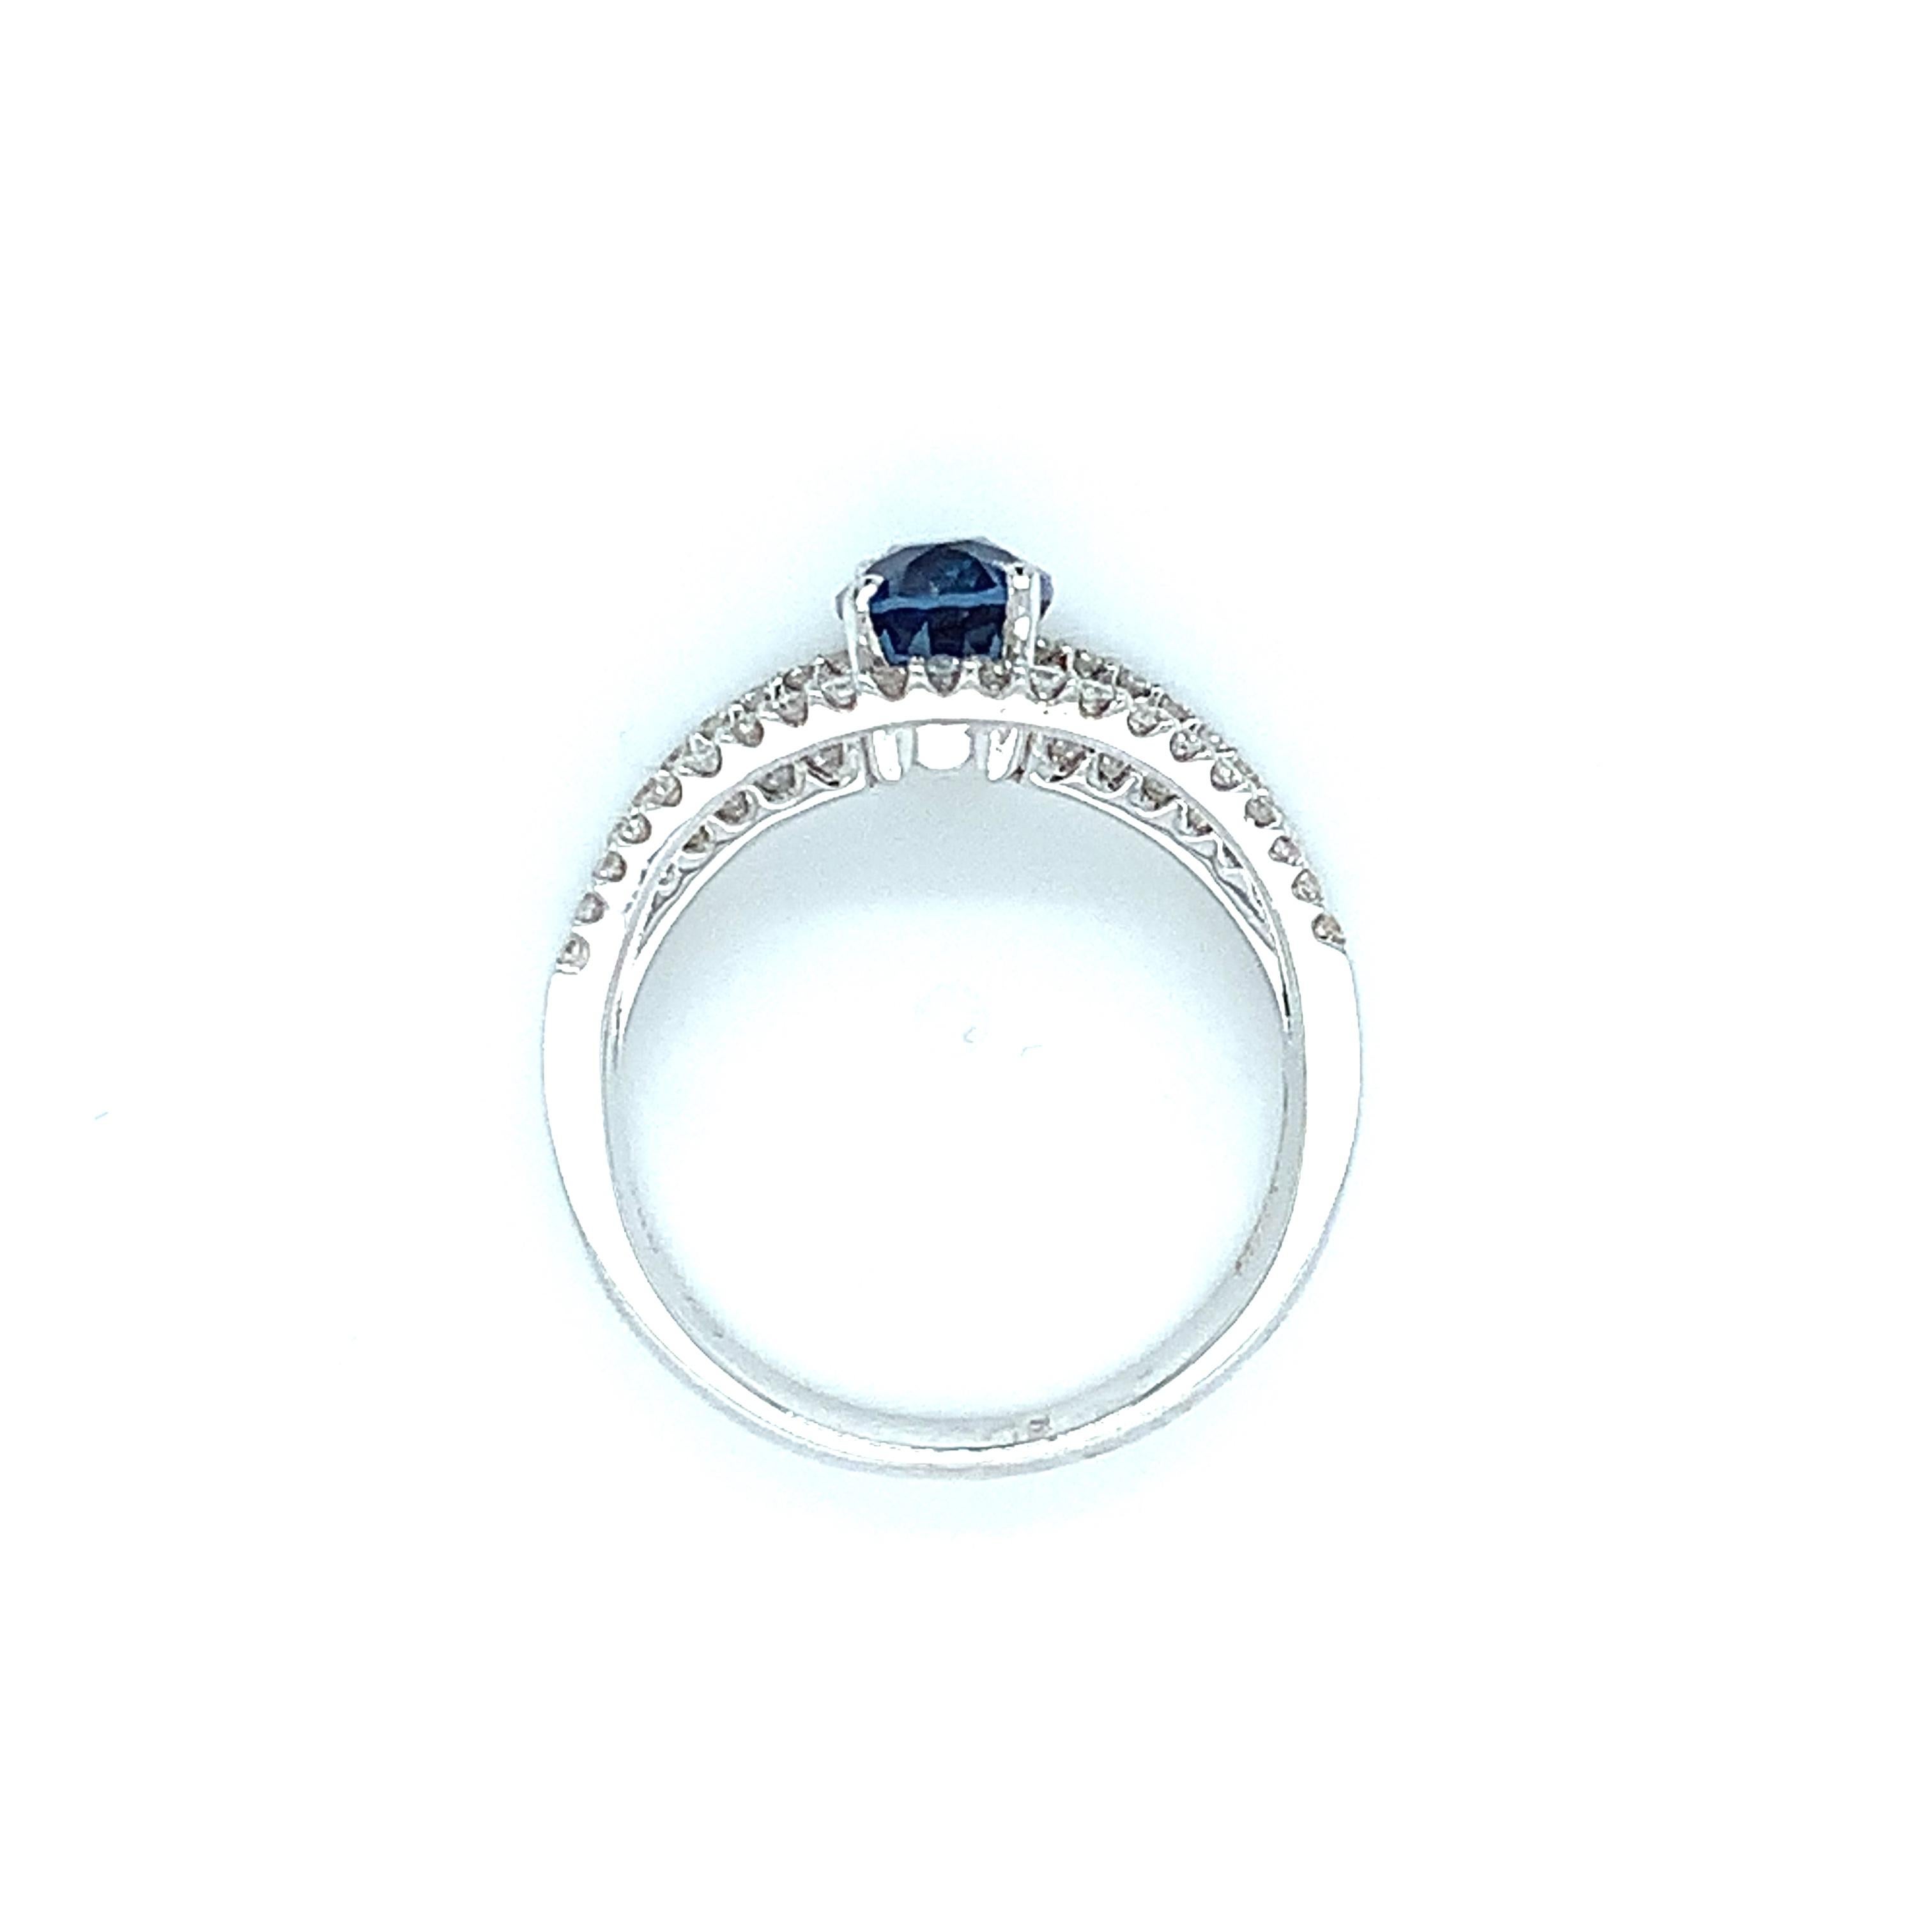 Royal Blue Sapphire and 4-Row Diamond Engagement Ring in White Gold, 1.56 Carat  For Sale 3